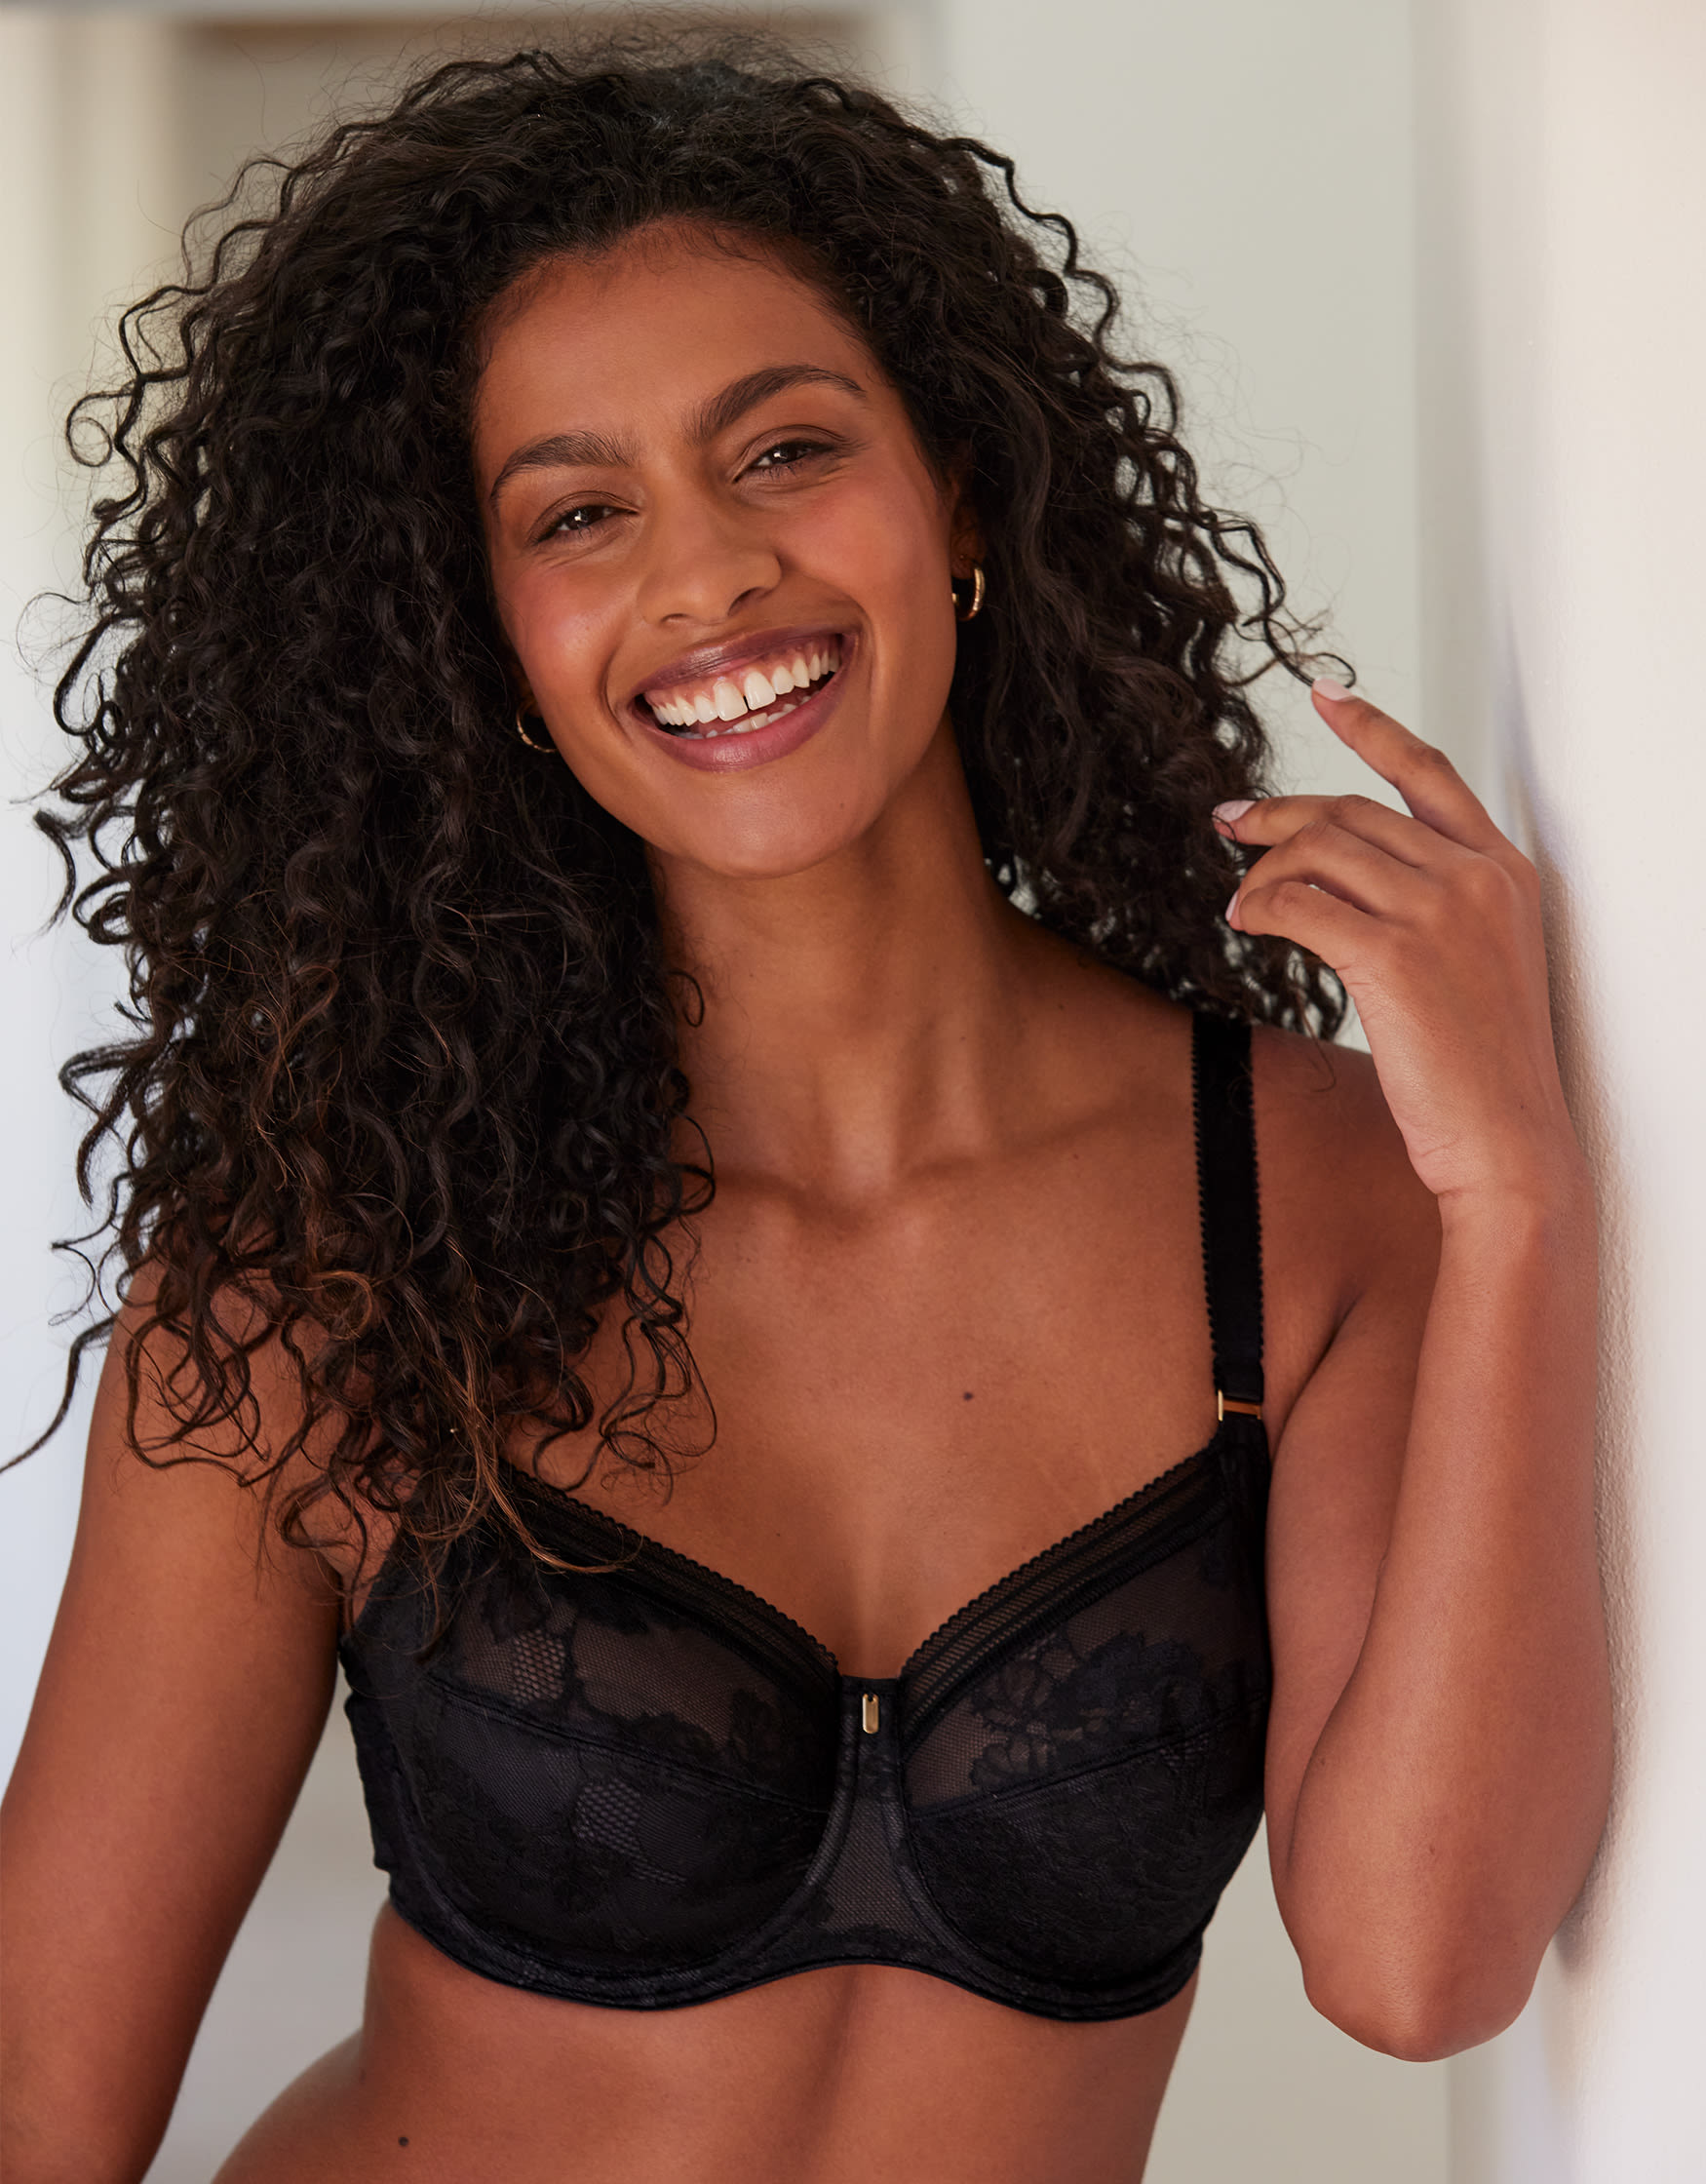 FUSION LACE-BLACK-UW FULL CUP SIDE SUPPORT BRA-FL102301-BRIEF-FL102350-BLK-PRODUCT-FILM  on Vimeo